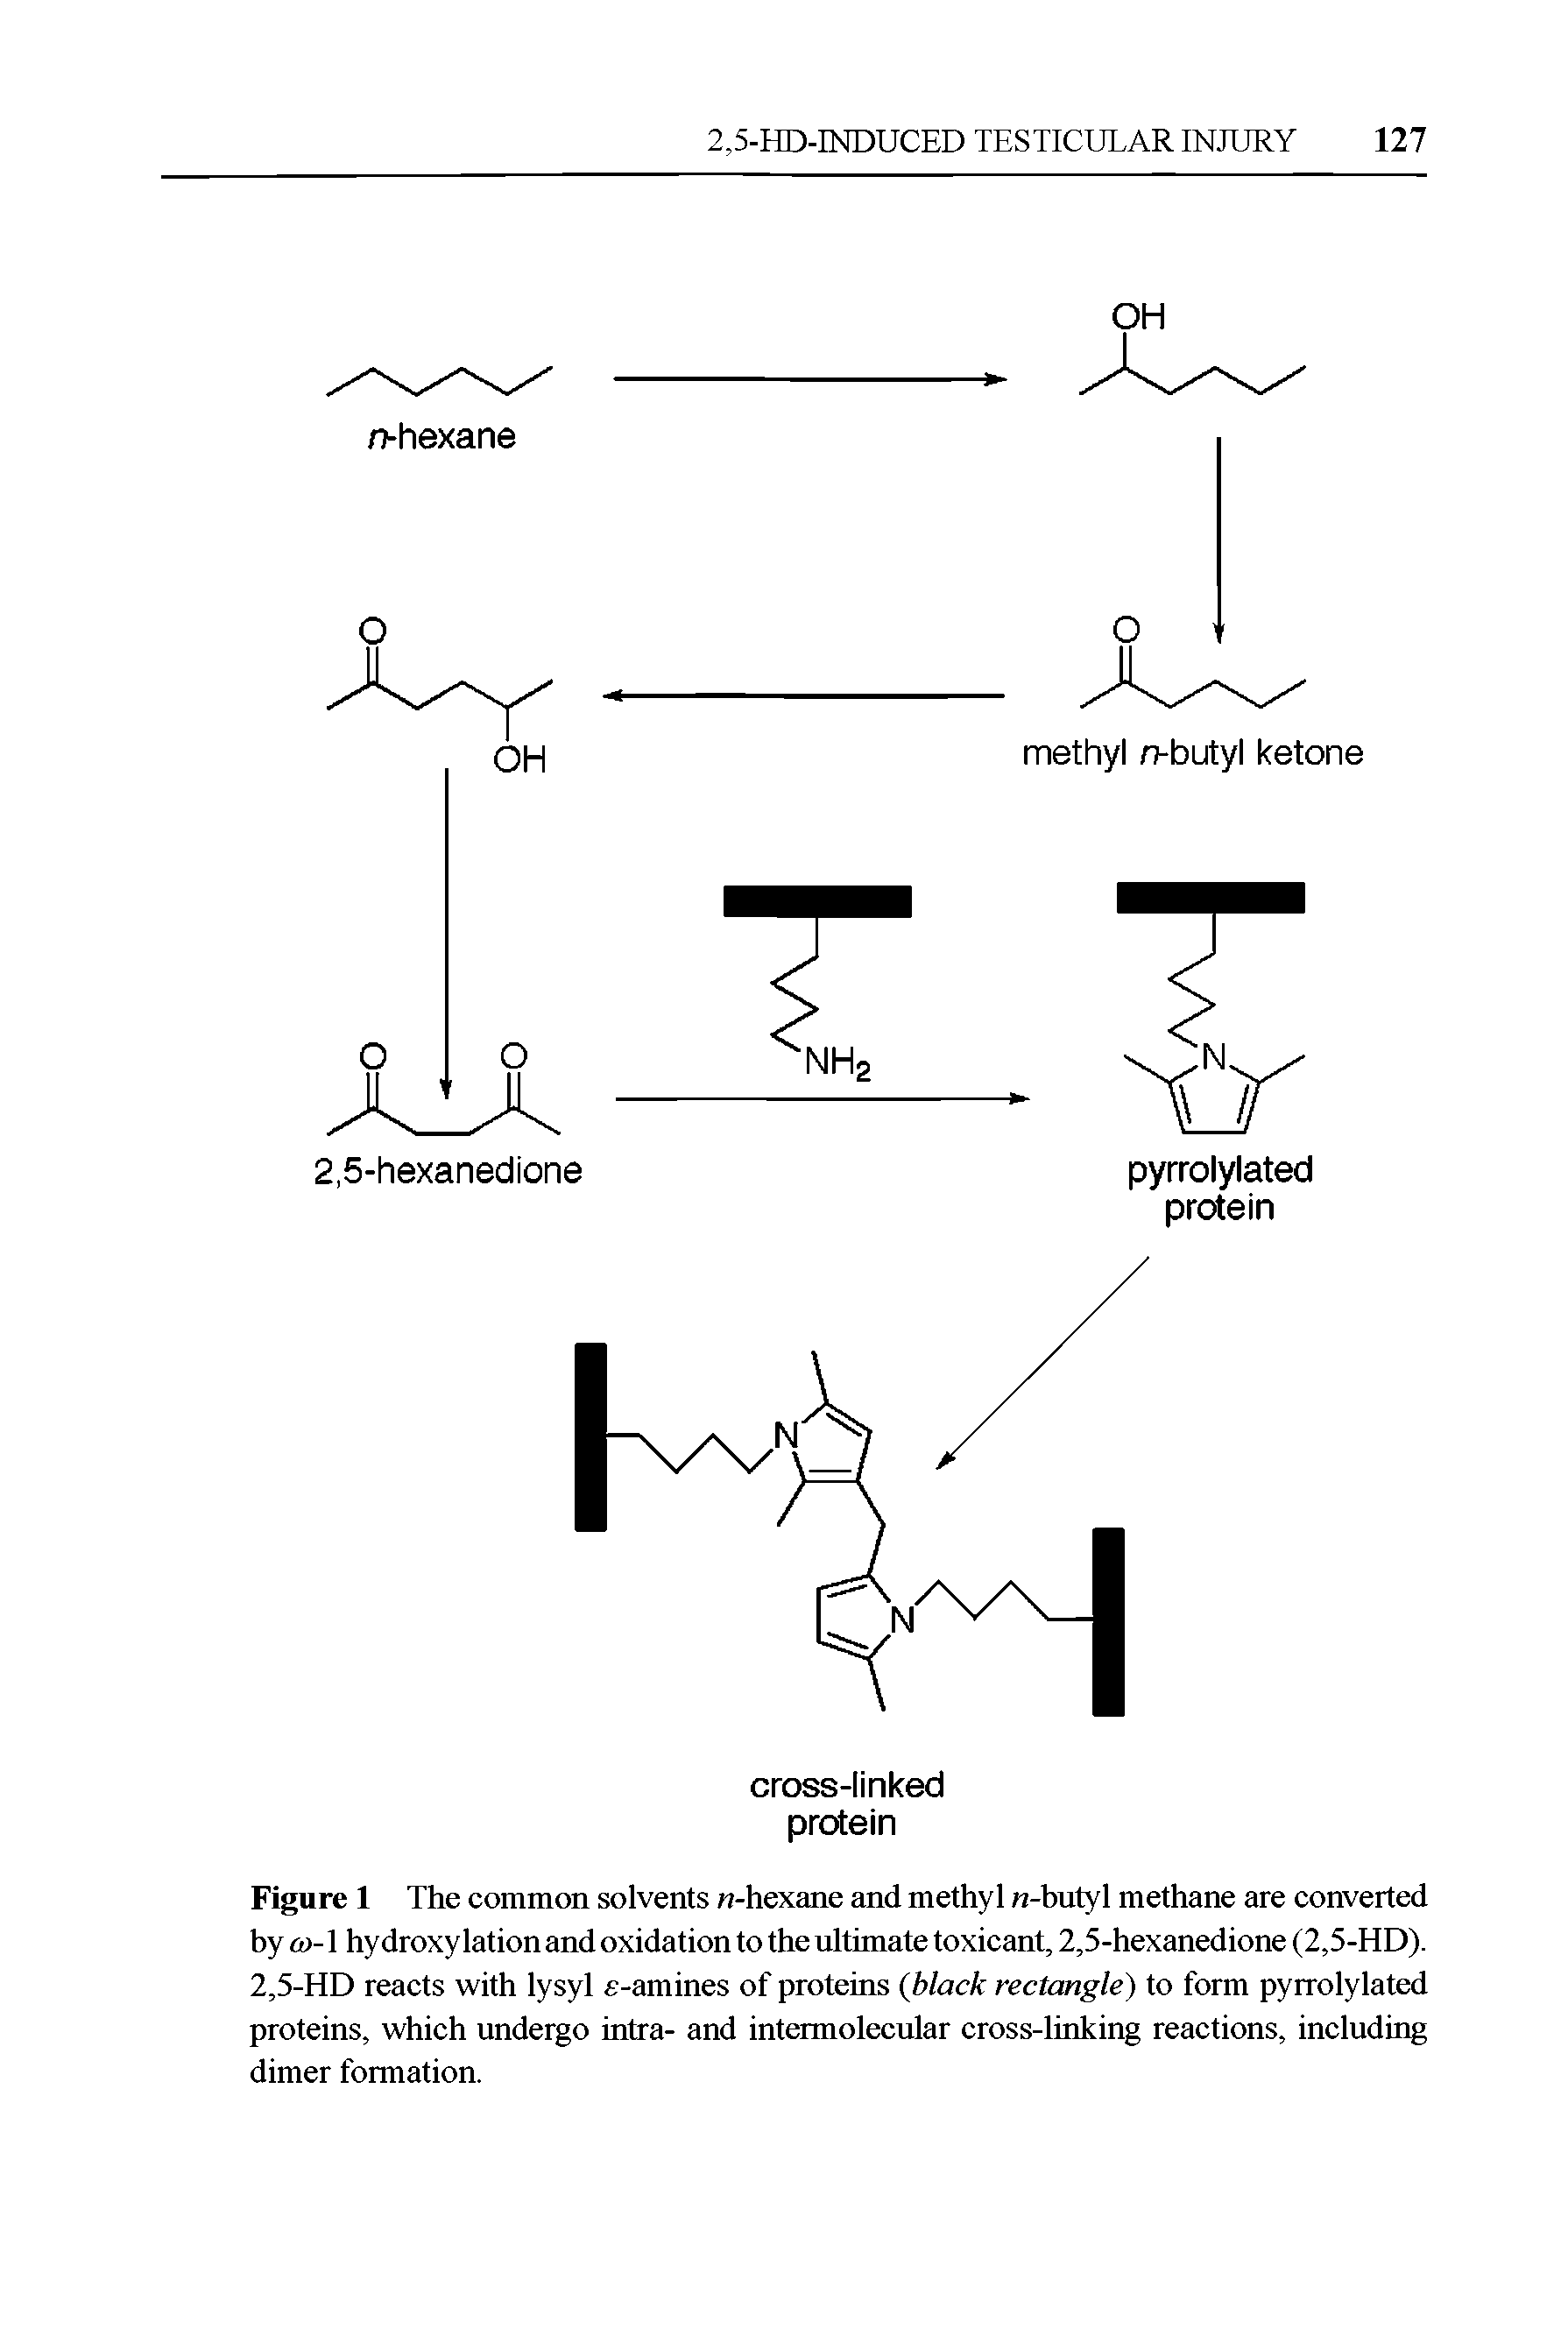 Figure 1 The common solvents n-hexane and methyl n-butyl methane are converted by co-1 hydroxy lation and oxidation to the ultimate toxicant, 2,5-hexanedione (2,5-HD). 2,5-HD reacts with lysyl e-amines of proteins (black rectangle) to form pyrrolylated proteins, which undergo intra- and intermolecular cross-linking reactions, including dimer formation.